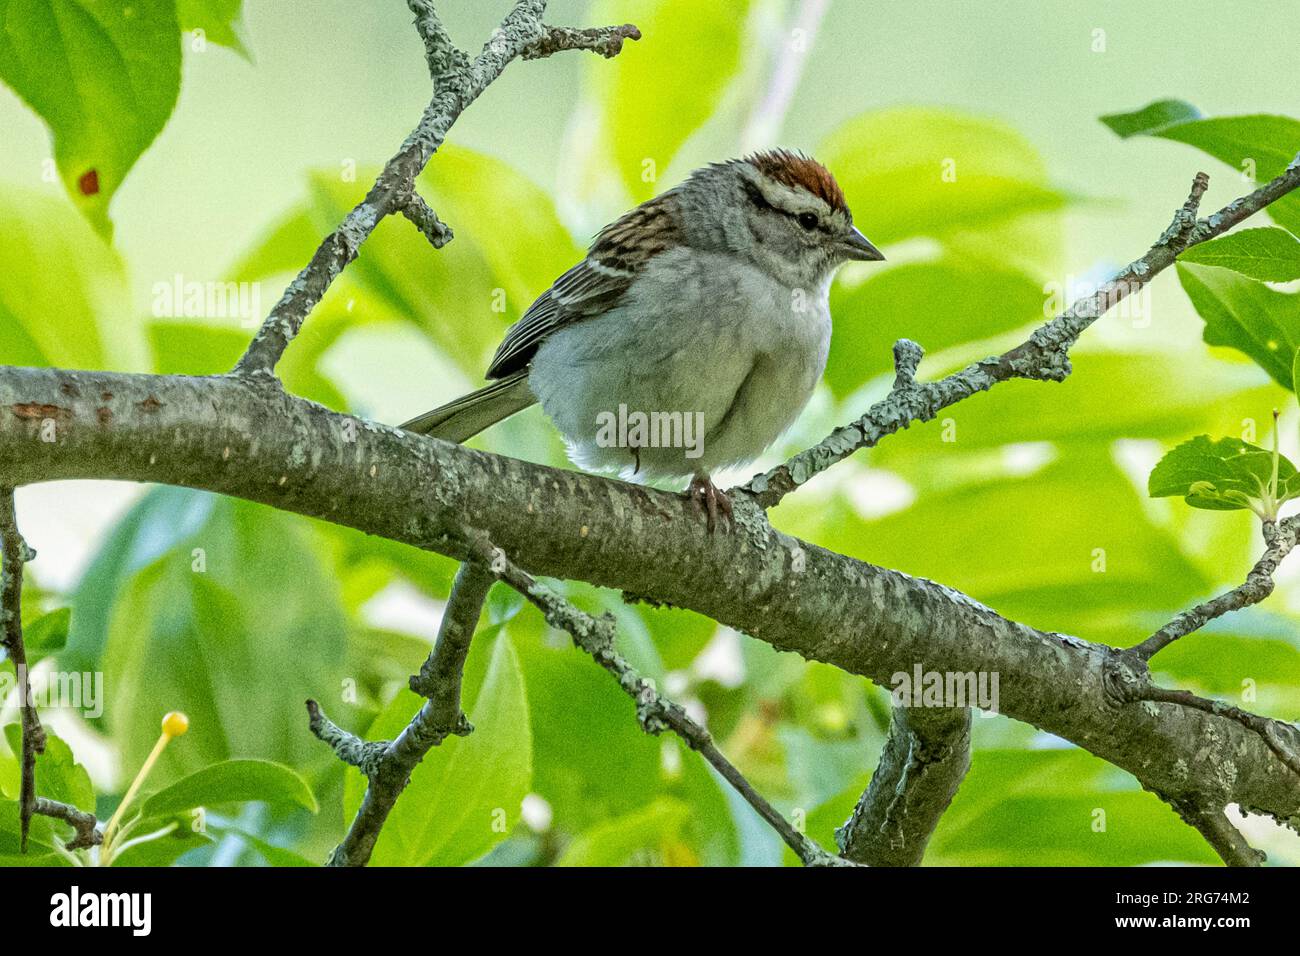 A chipping sparrow perched on a tree branch Stock Photo